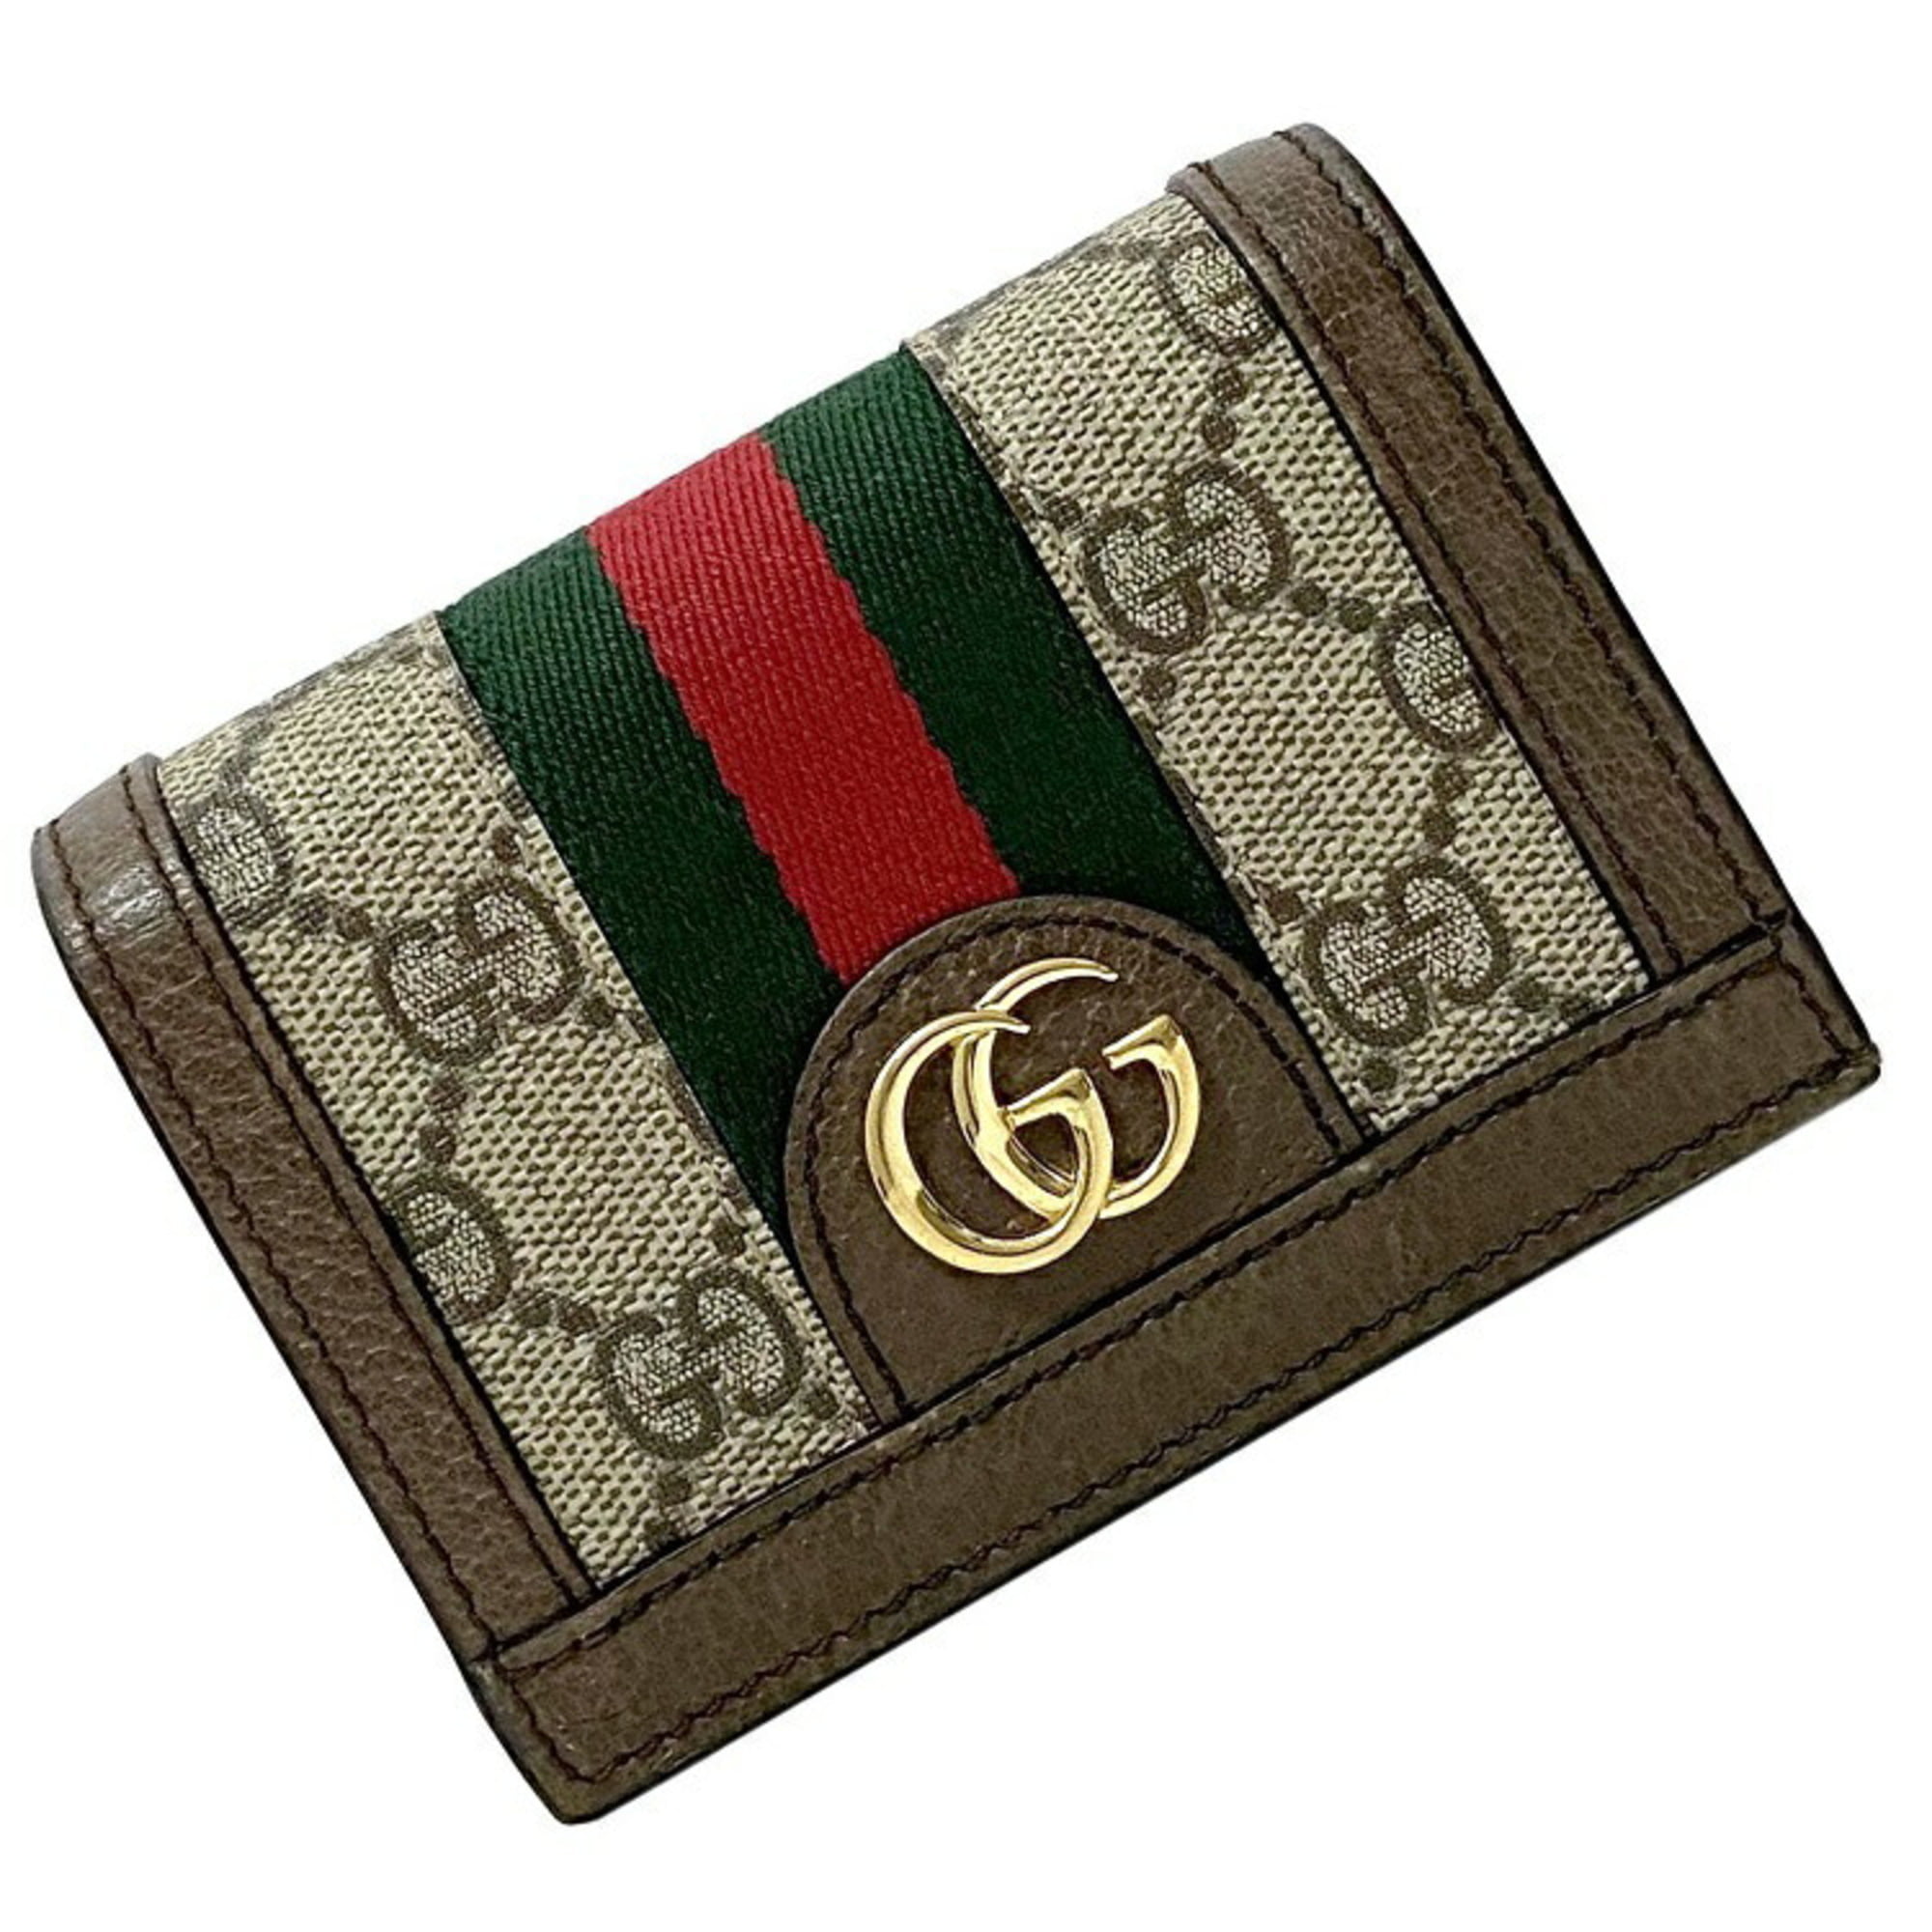 Gucci - Authenticated Ophidia Wallet - Leather Beige for Women, Good Condition